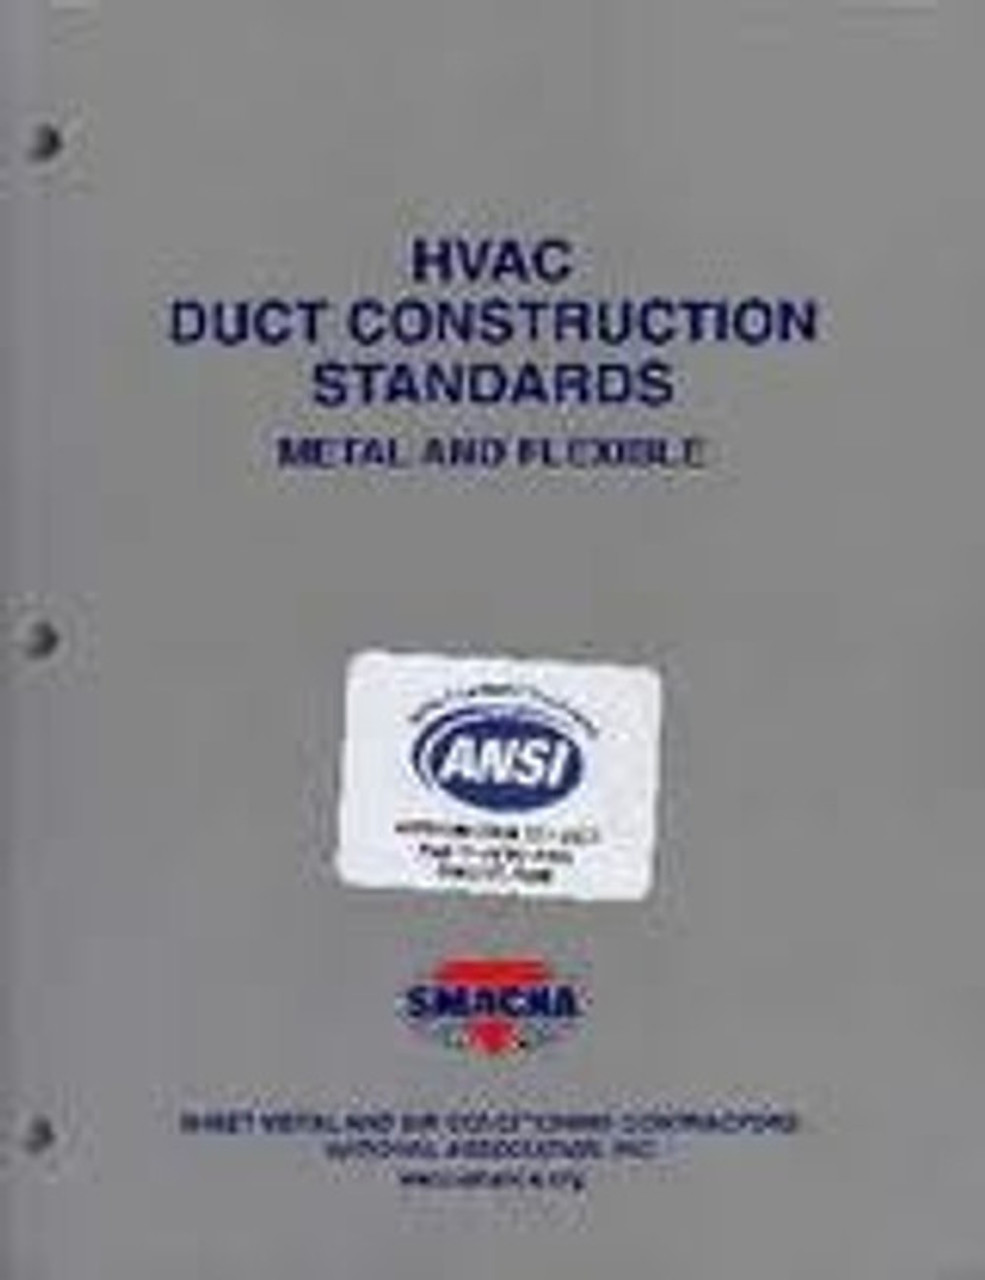 HVAC Duct Construction Standards, Metal and Flexible 4th Edition